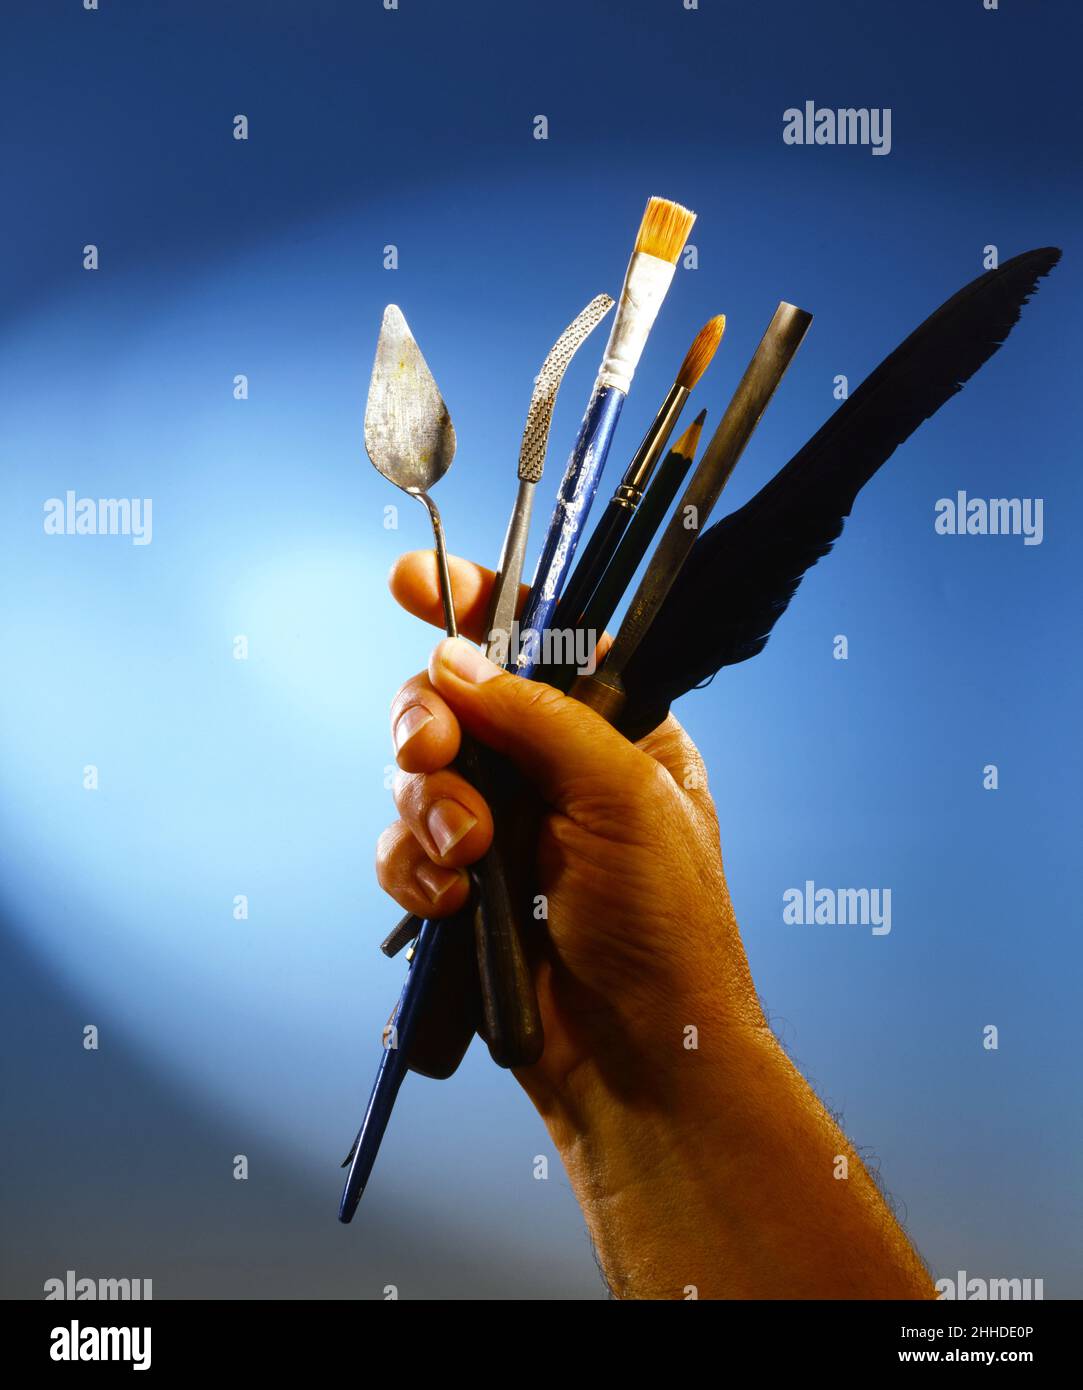 Male hand holding artists tools on a blight blue background copy space brushes painting knife feather scraper Stock Photo